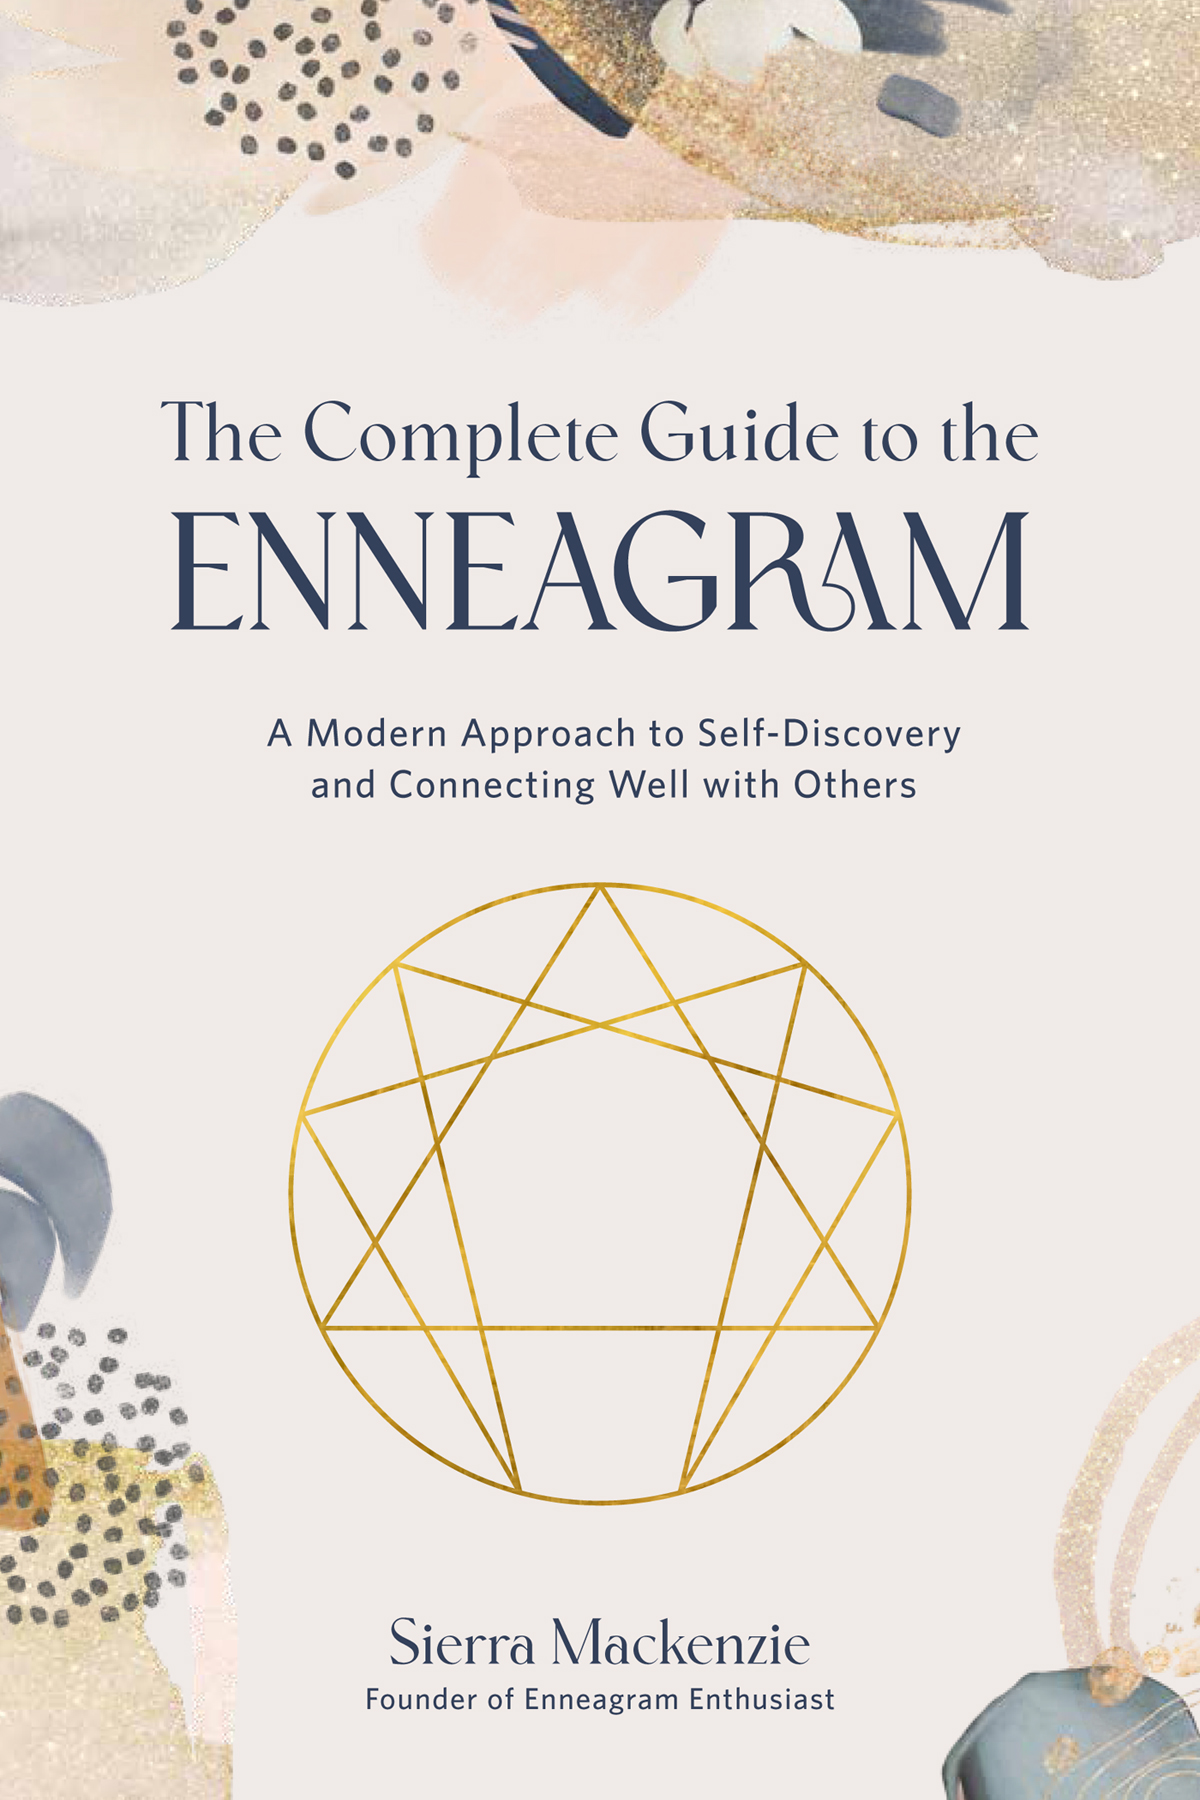 The Complete Guide to the Enneagram